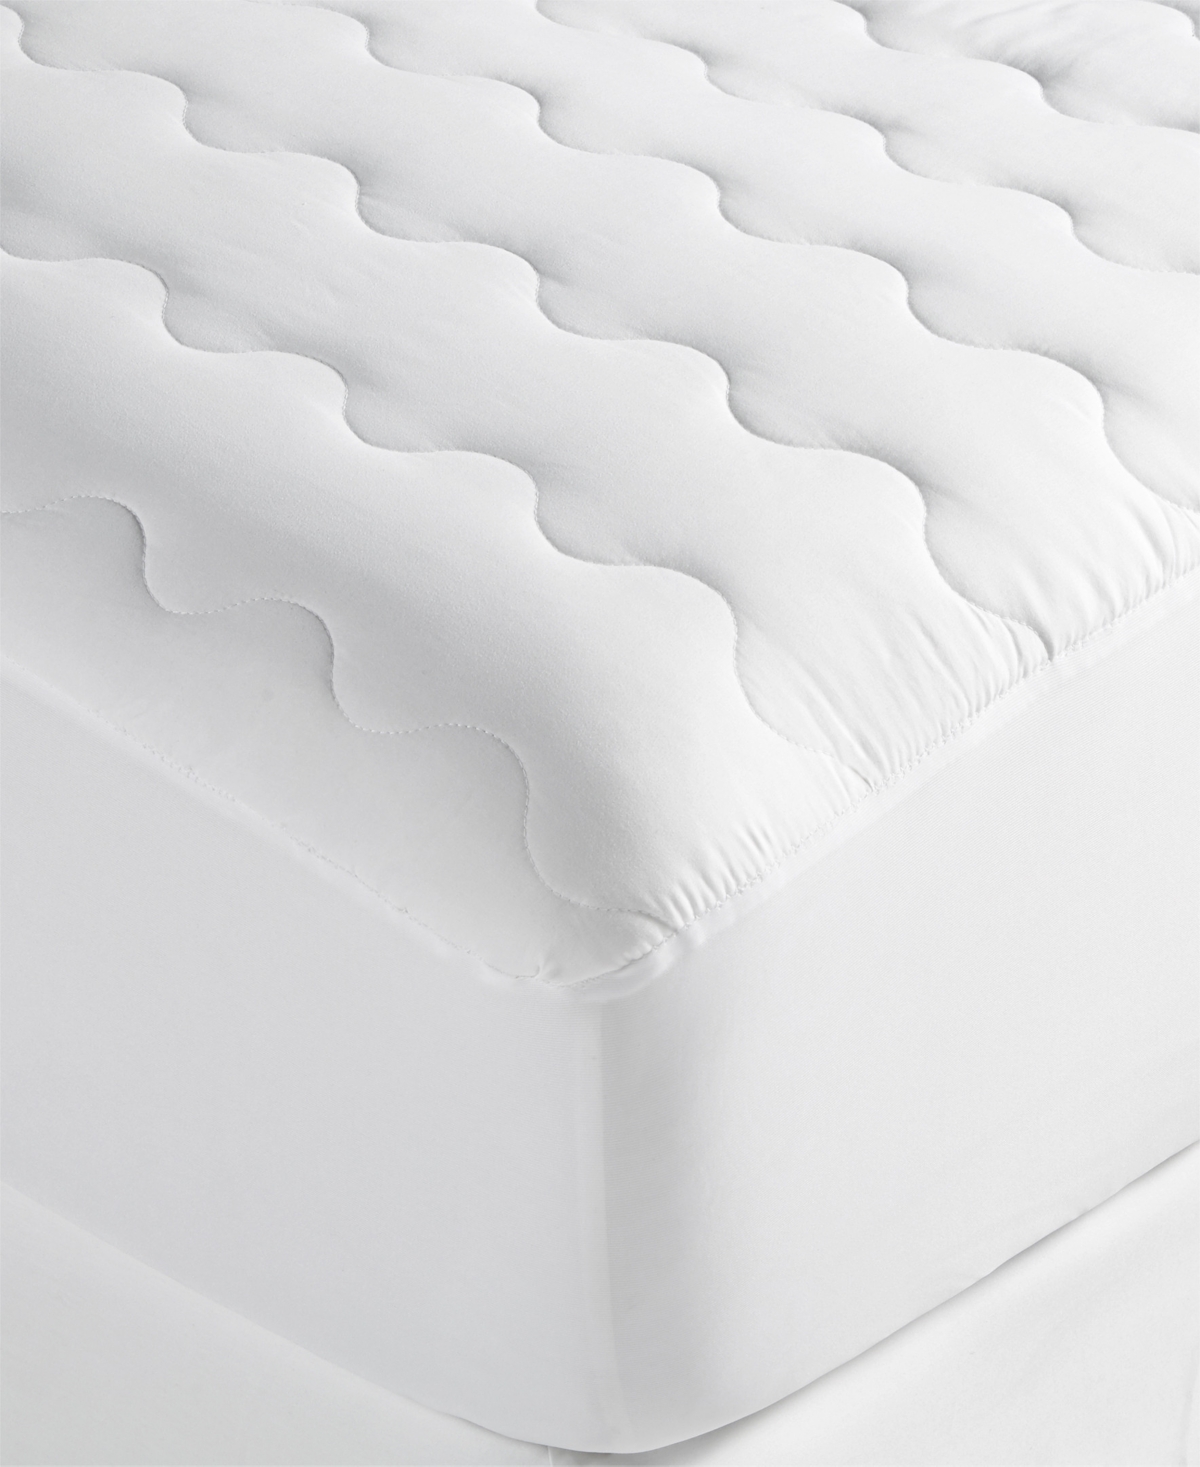 Shop Home Design Easy Care Waterproof Mattress Pads, Queen, Created For Macy's In White